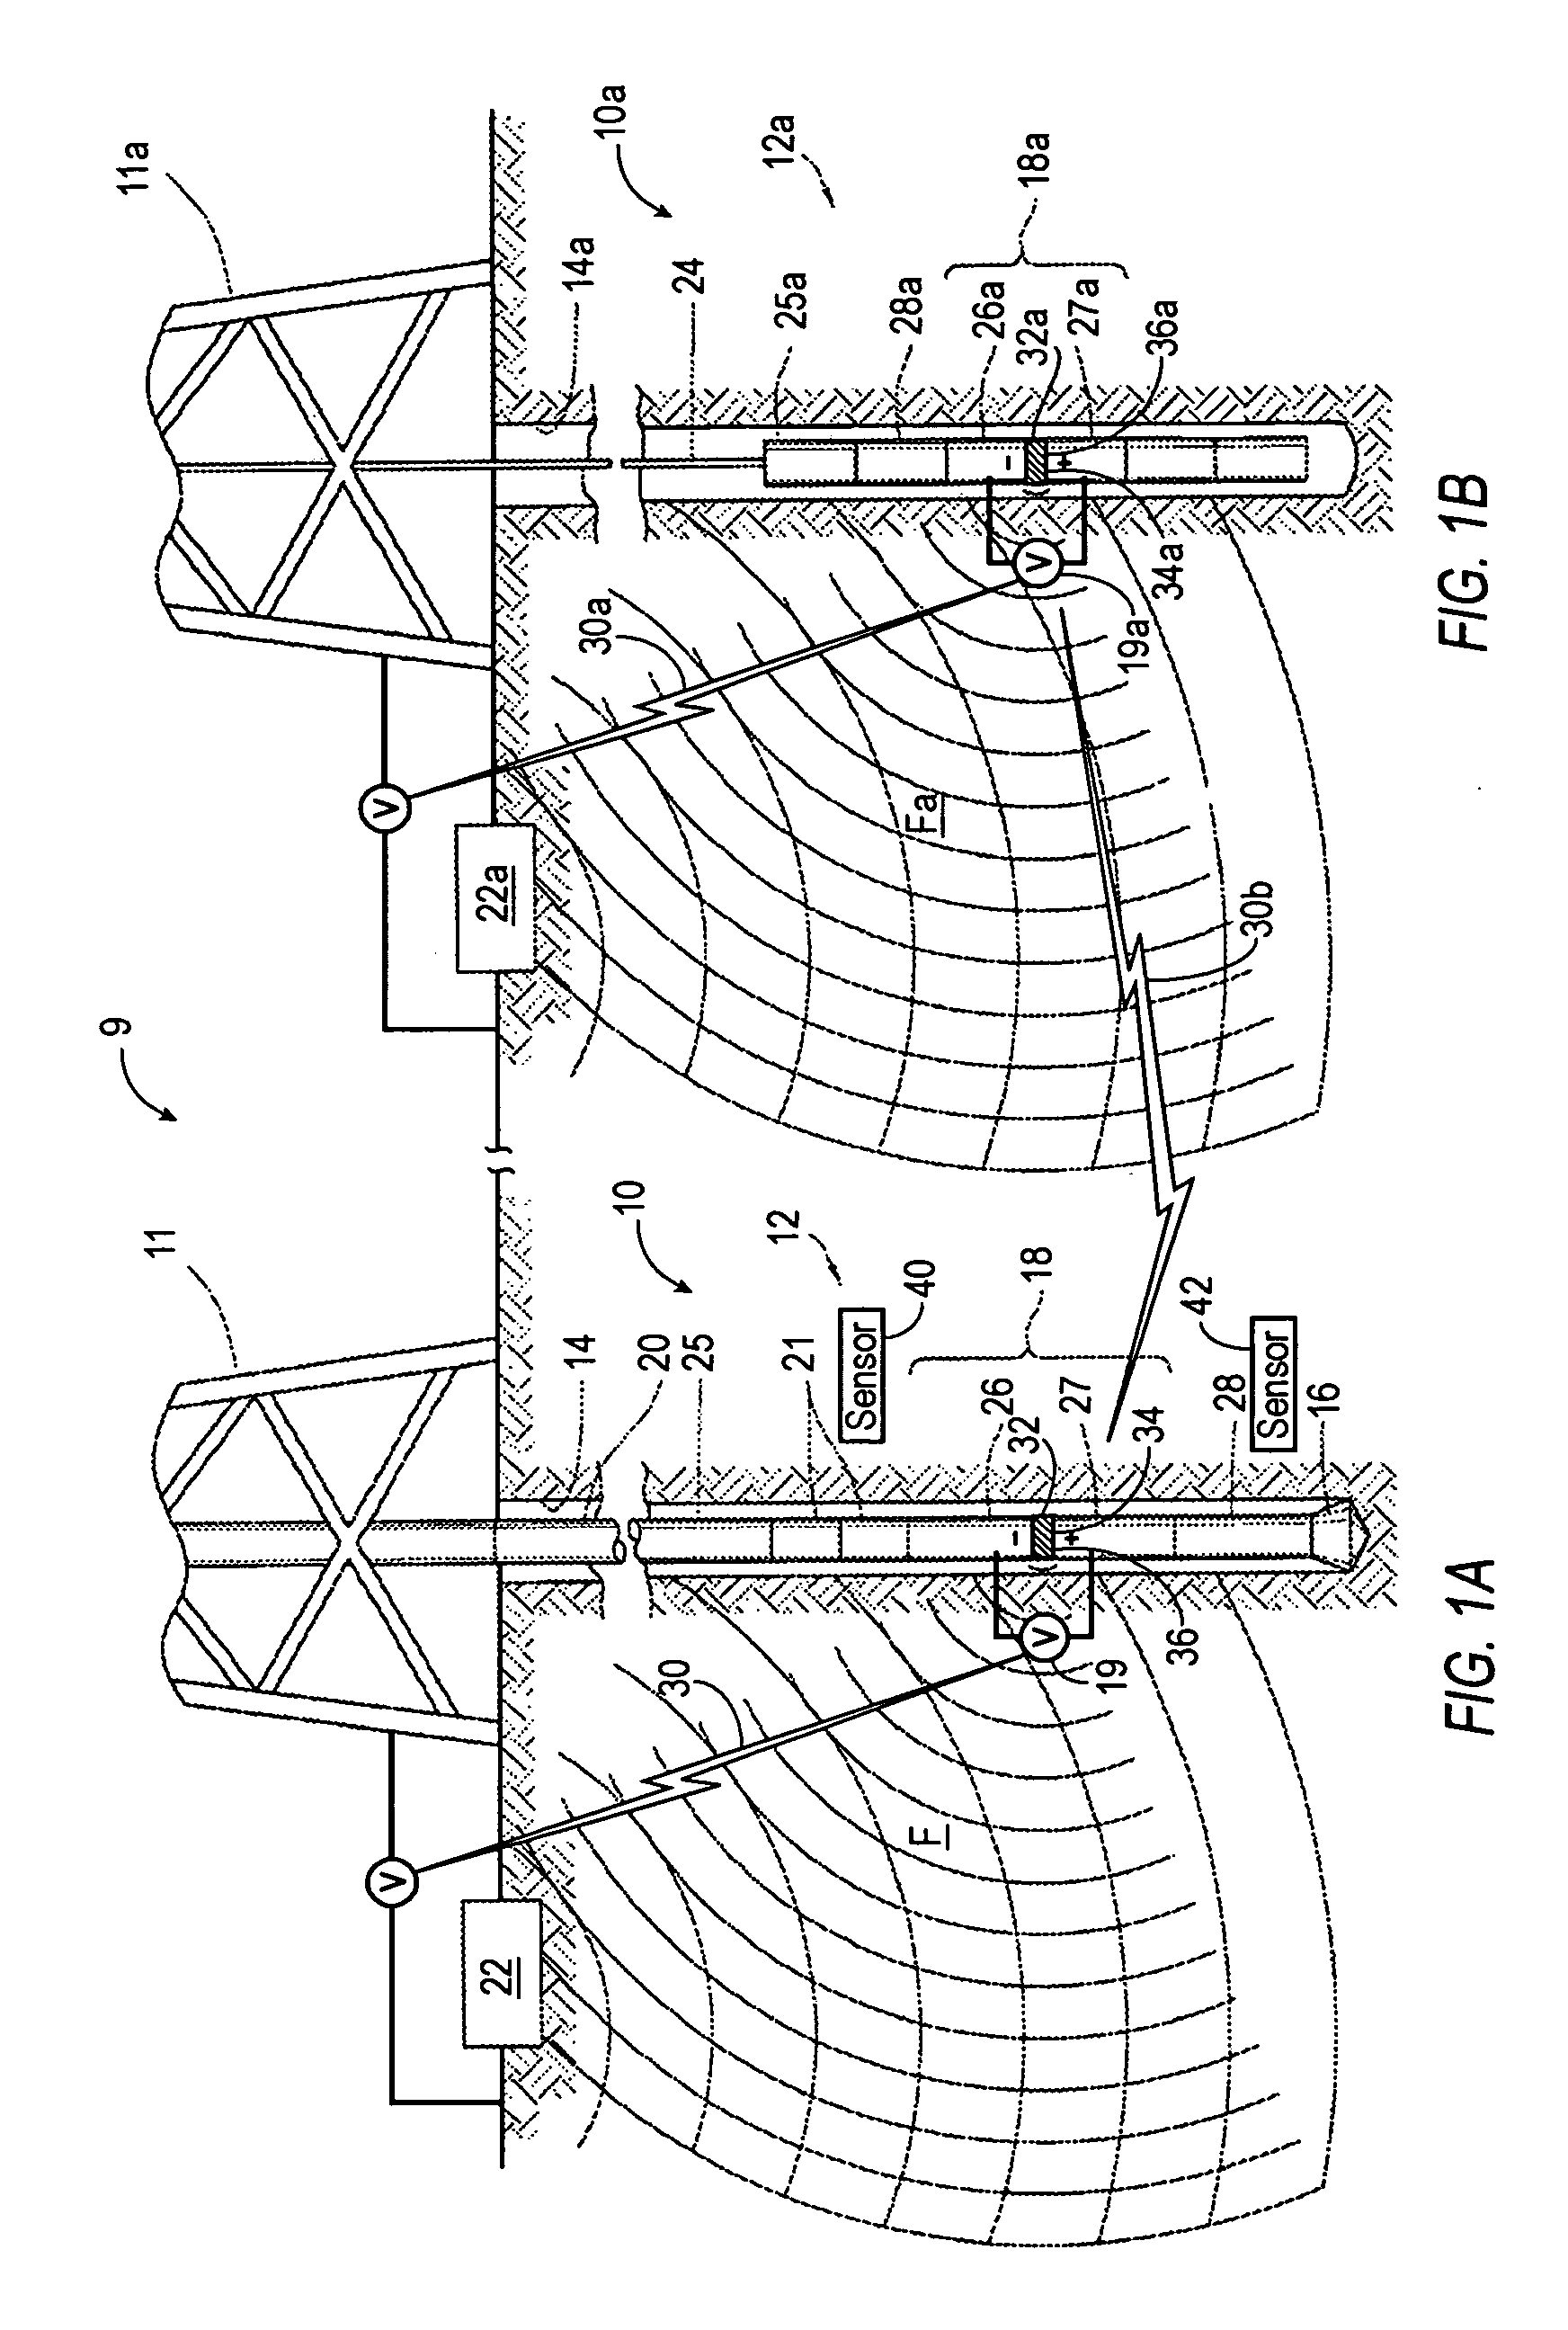 Formation evaluation system and method